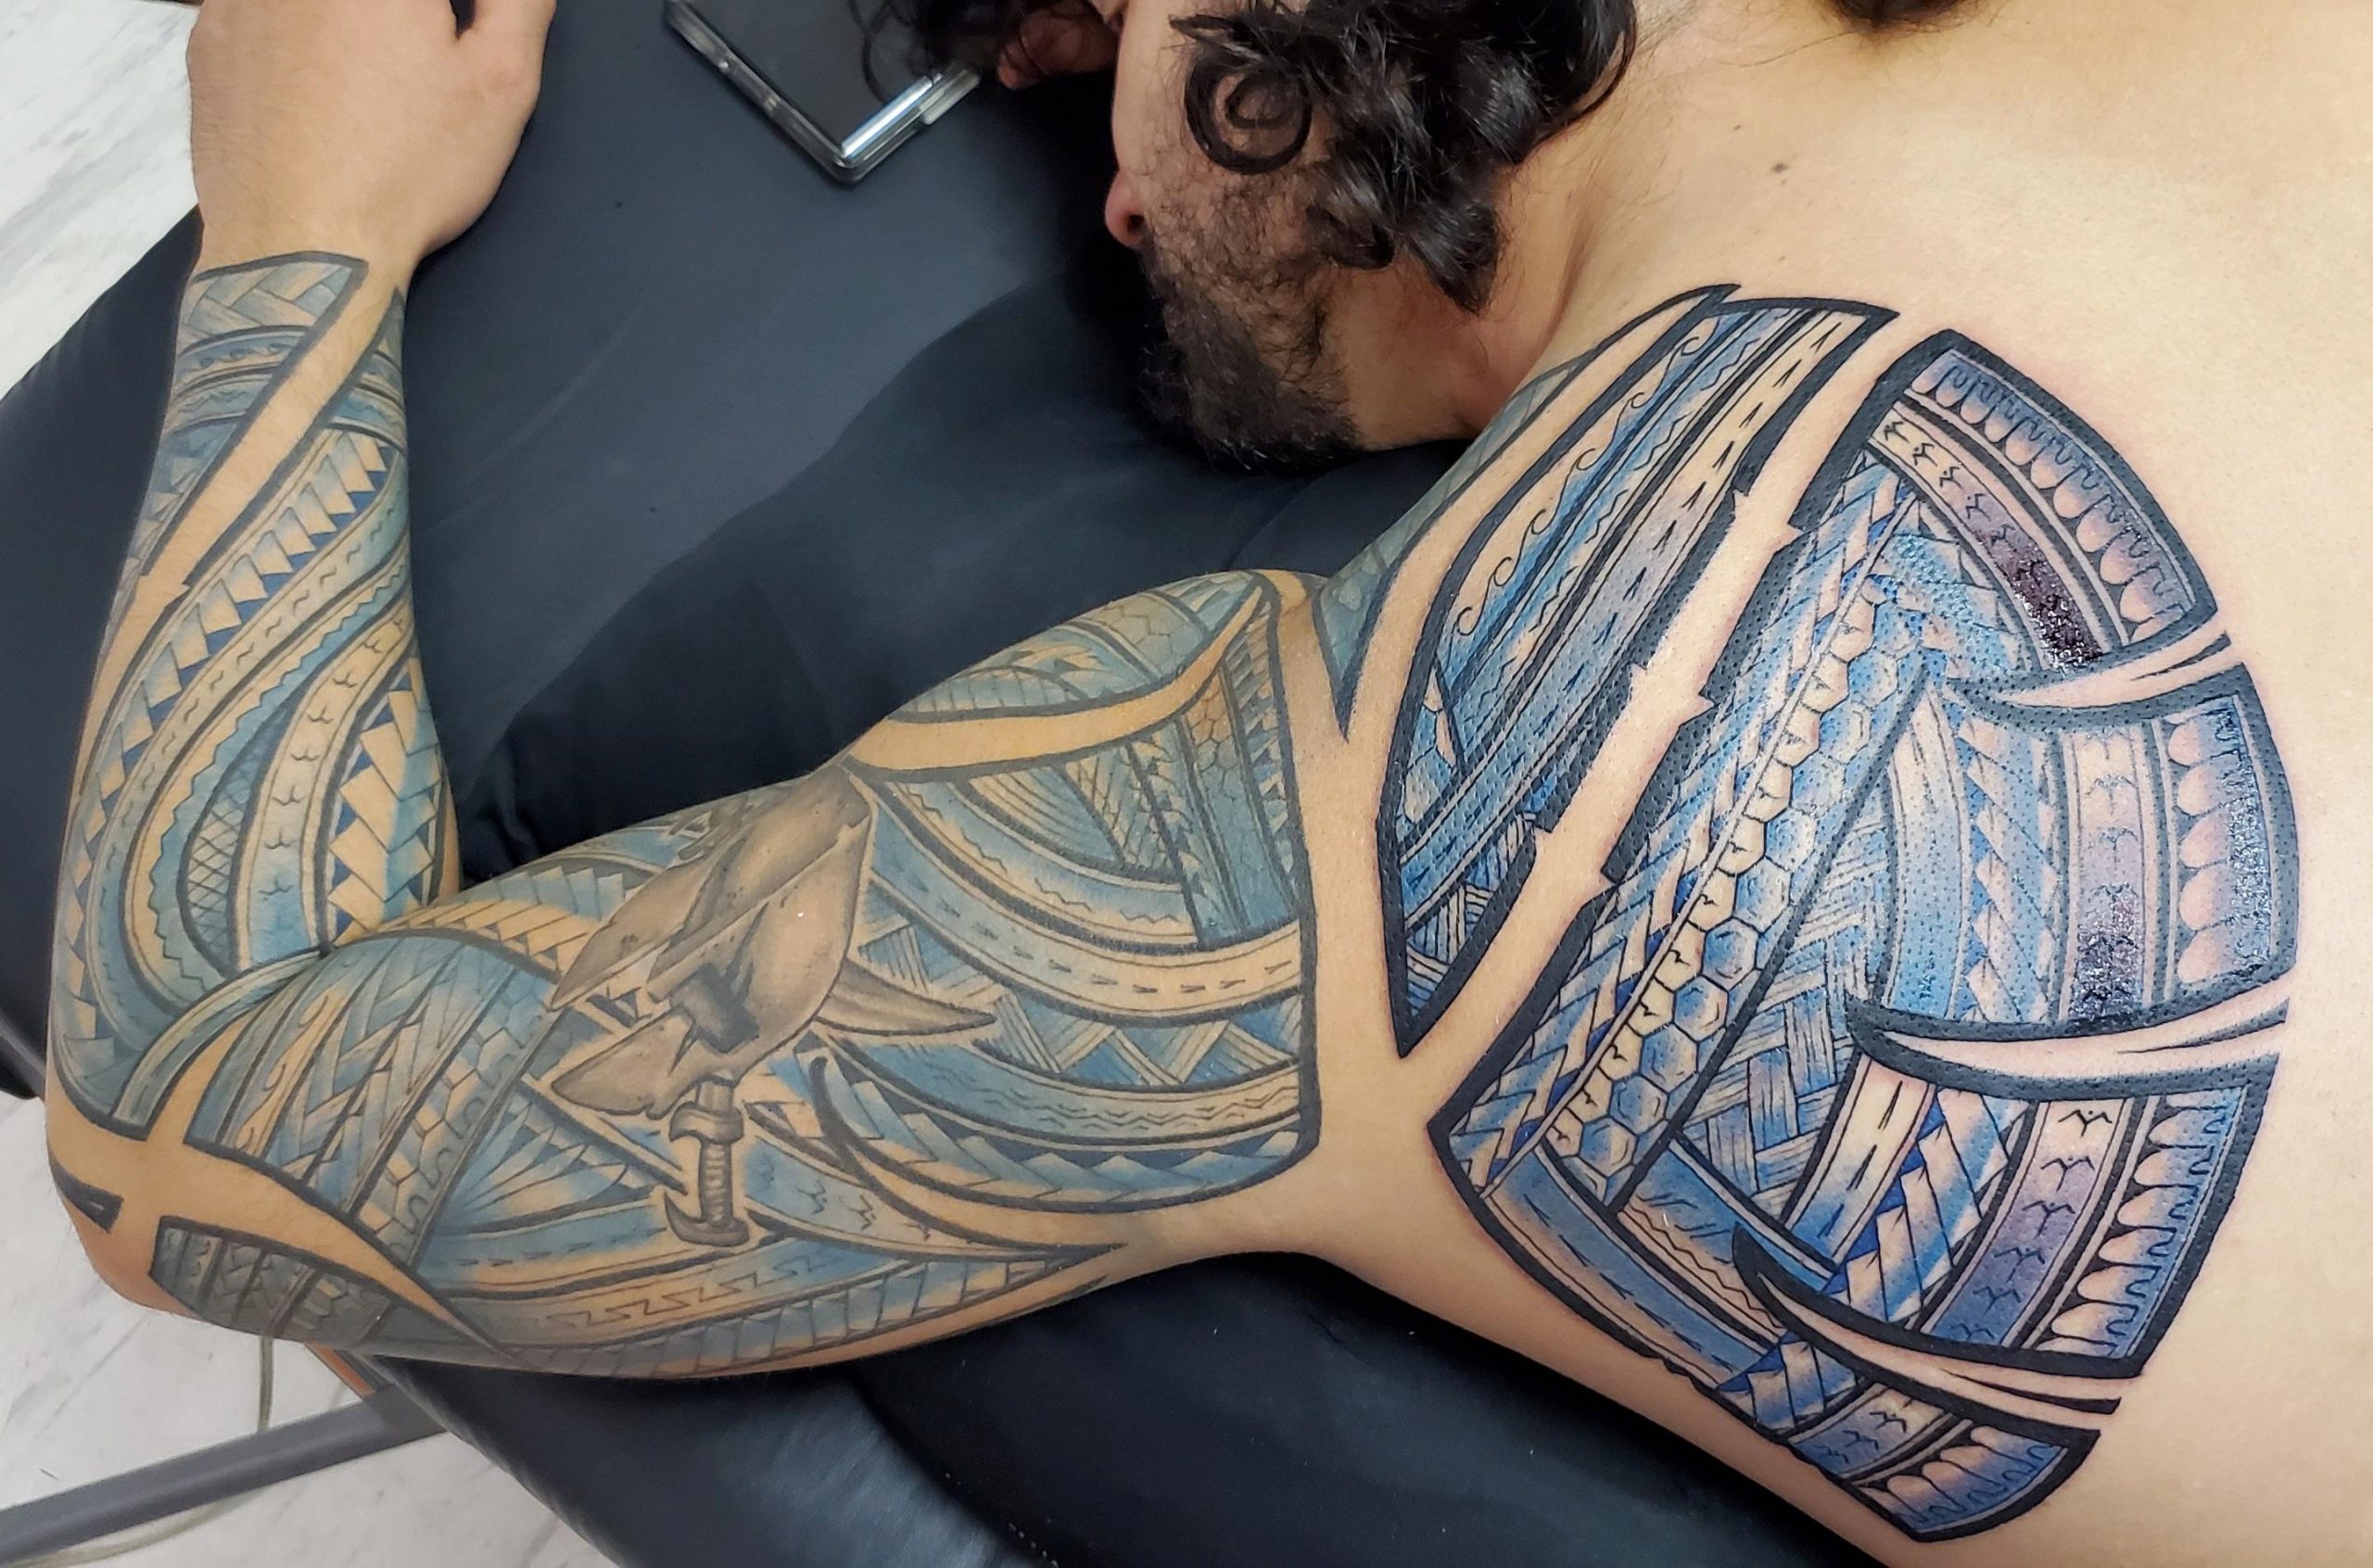 Visayan/Tradition Filipino Tribal done by Nate Arbaquez of Spiritual  Journey tattoo in Southern California : r/tattoos